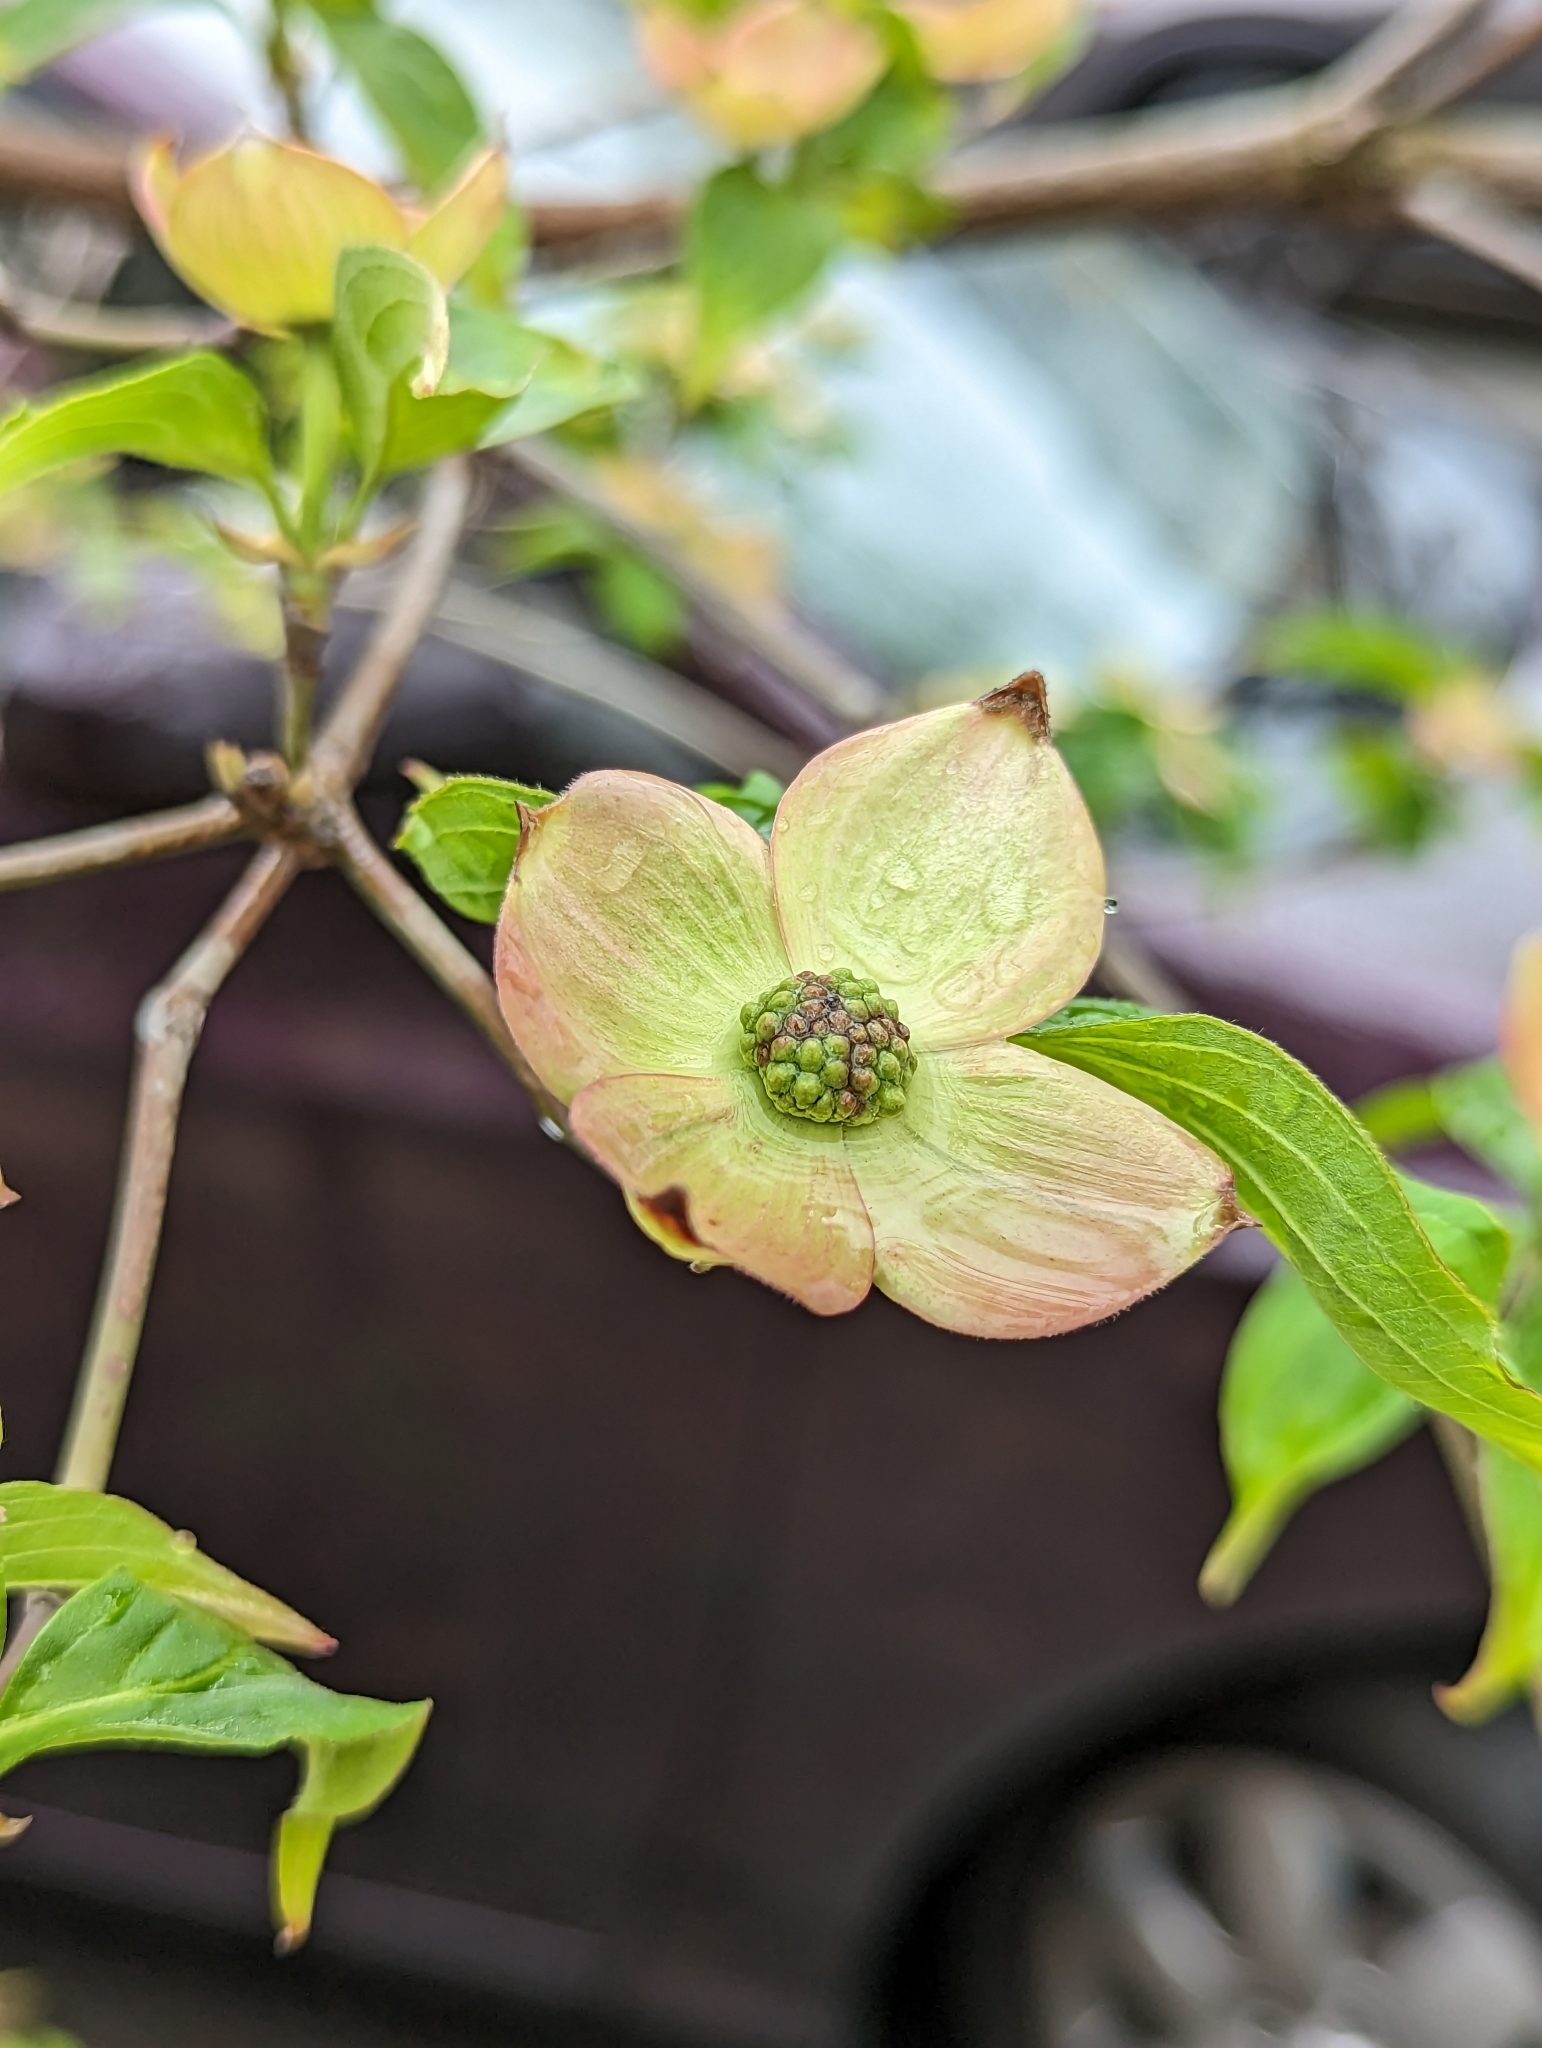 Green tree leaves with raindrops and a green and pink bud, in front of a car.